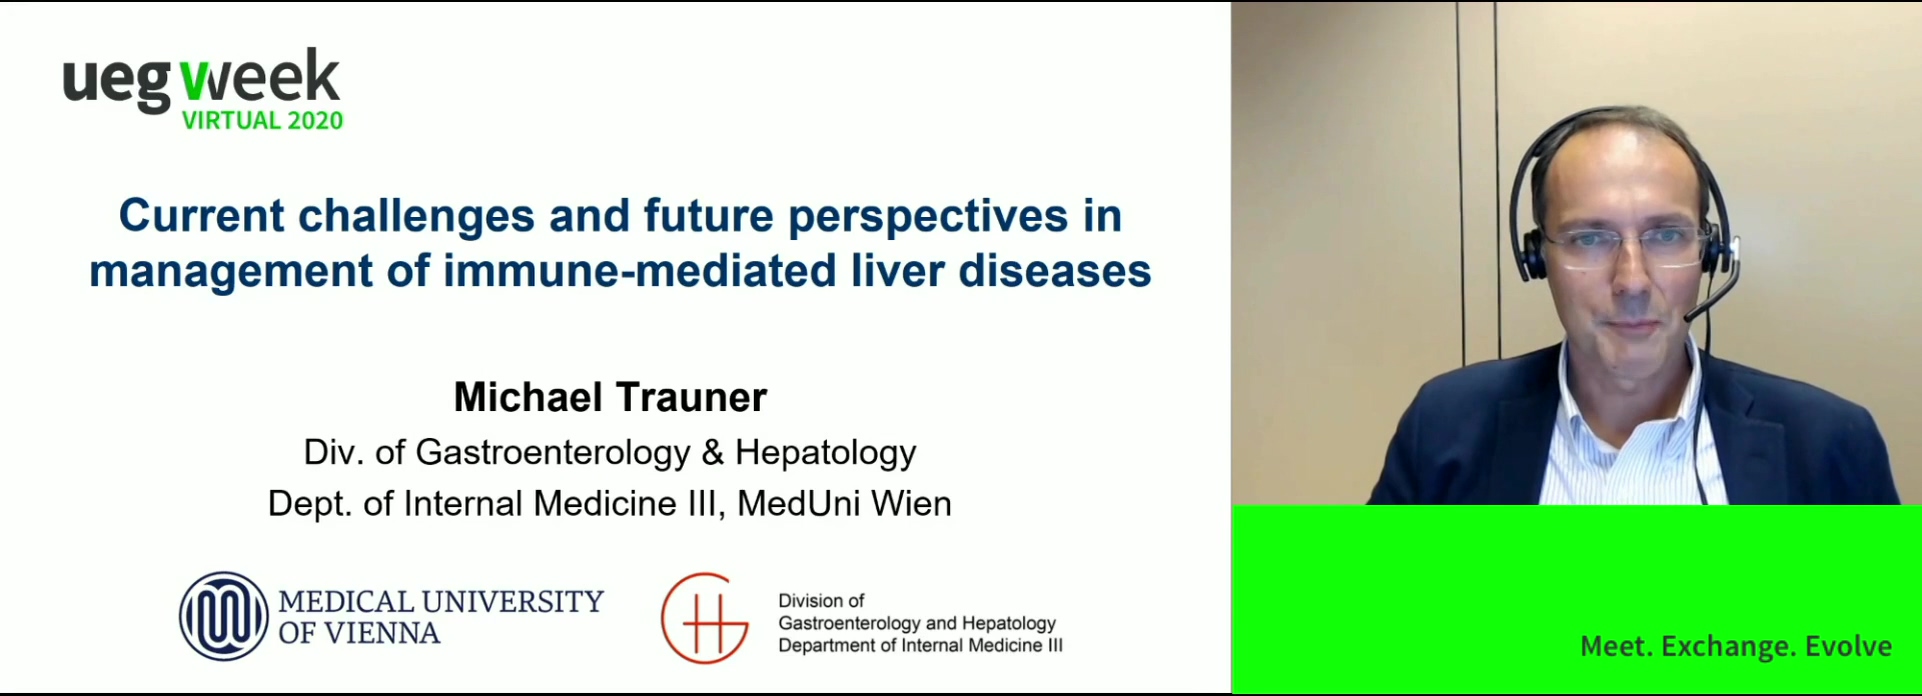 Current challenges and future perspectives in management of immune-mediated liver diseases